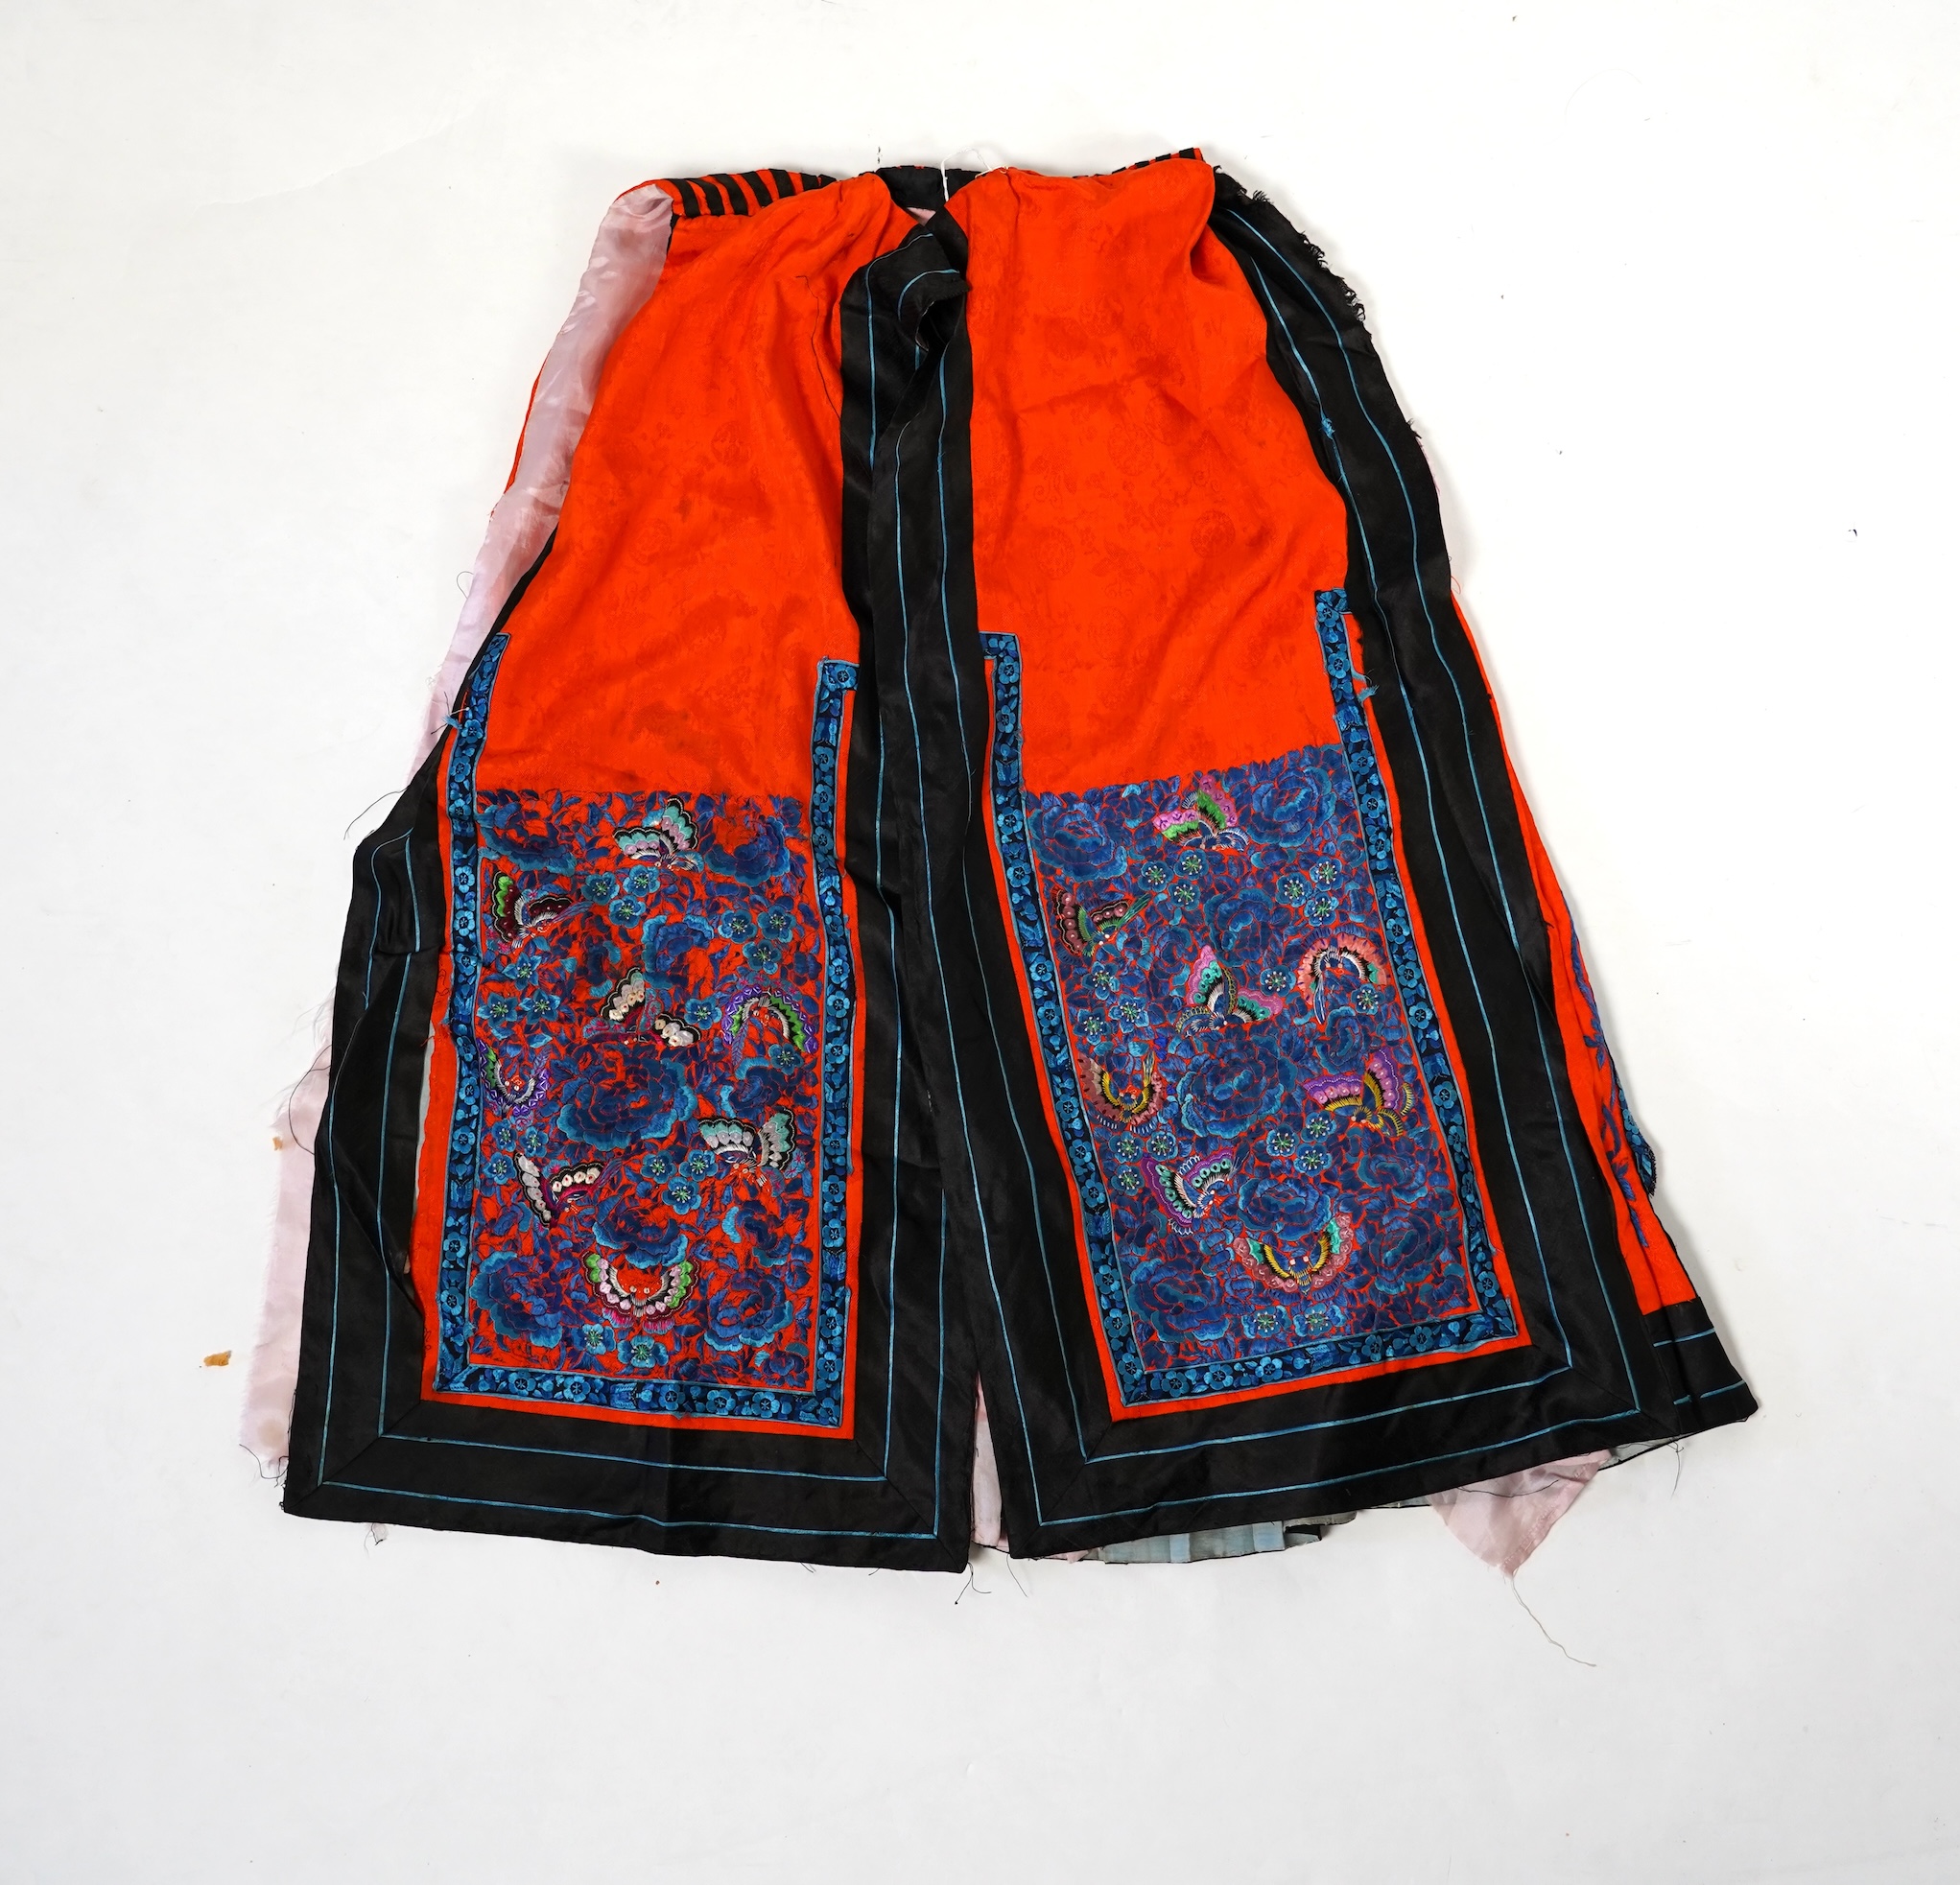 A late 19th century Chinese embroidered skirt, now made into a tunic                                                                                                                                                        